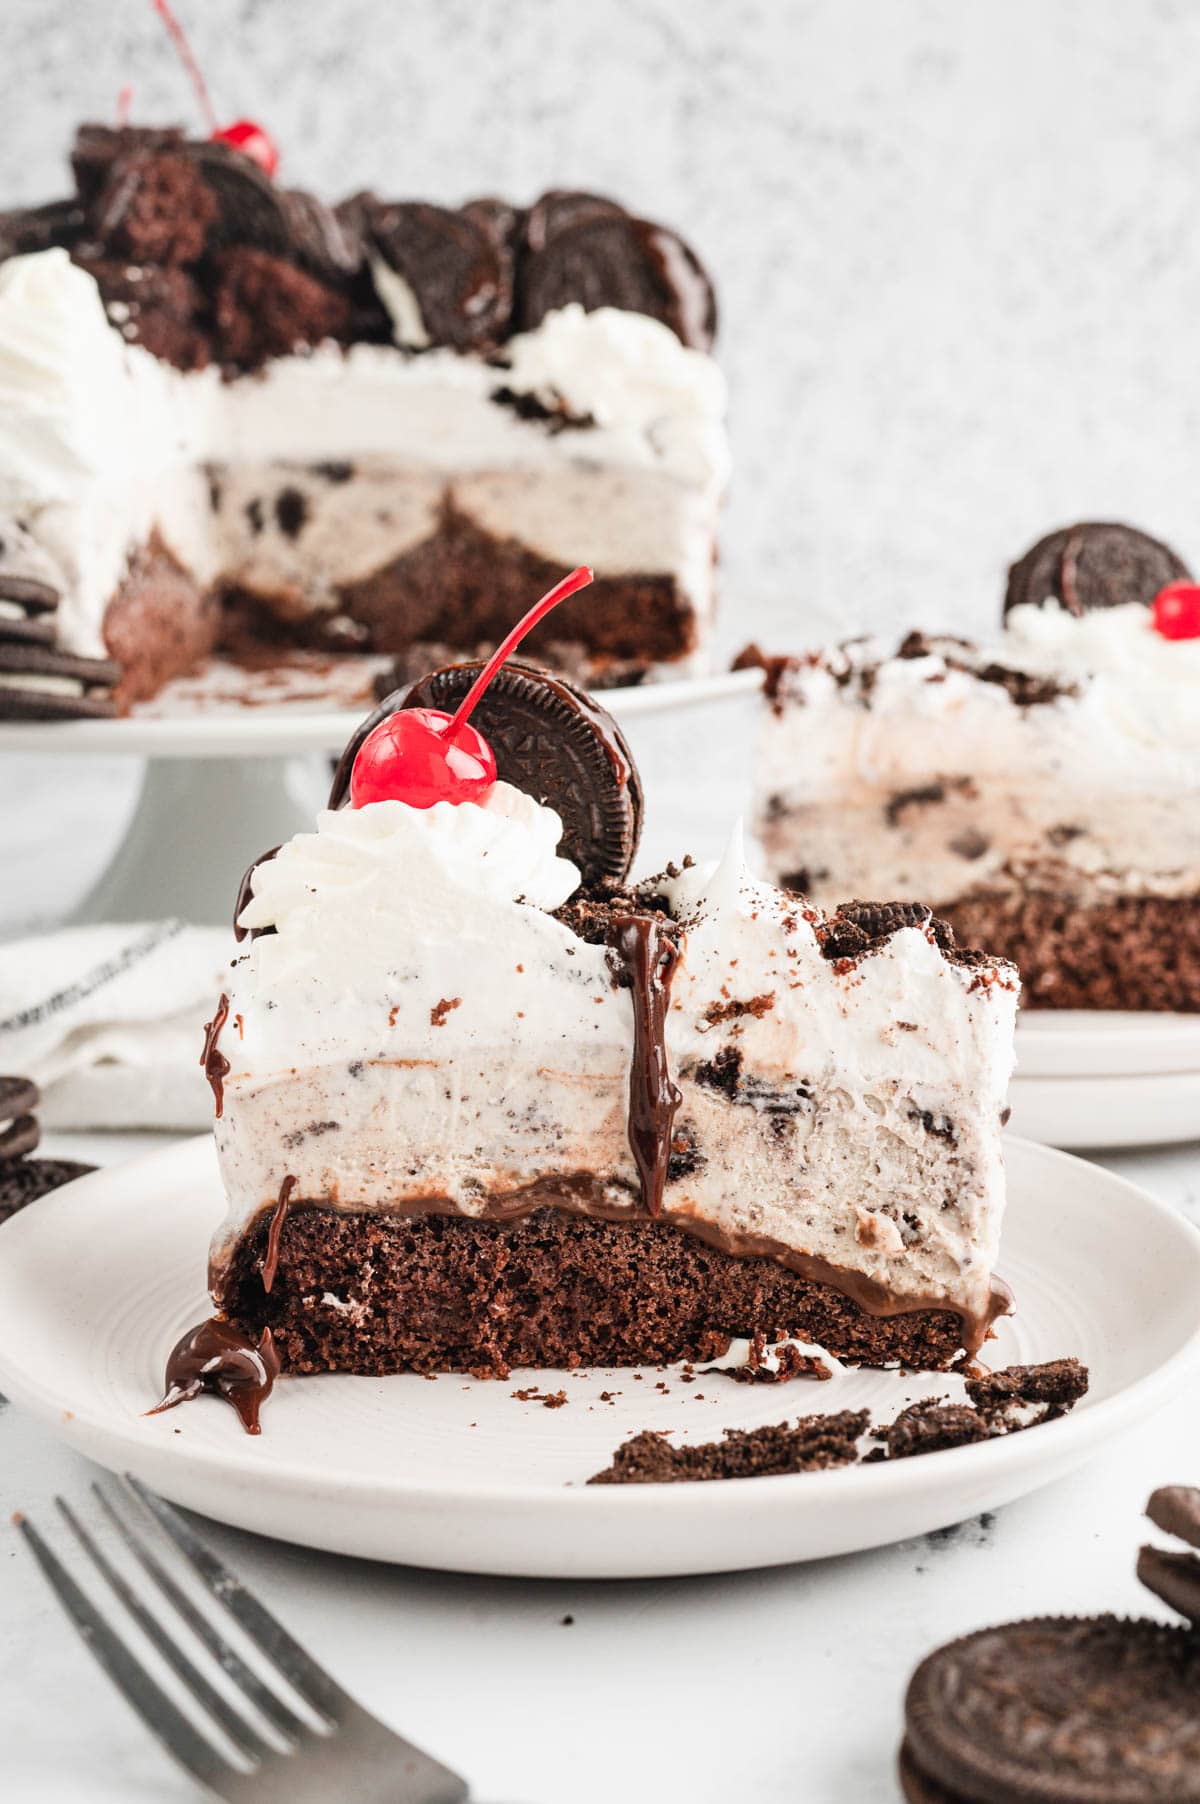 Slice of ice cream cake with oreos on a plate.